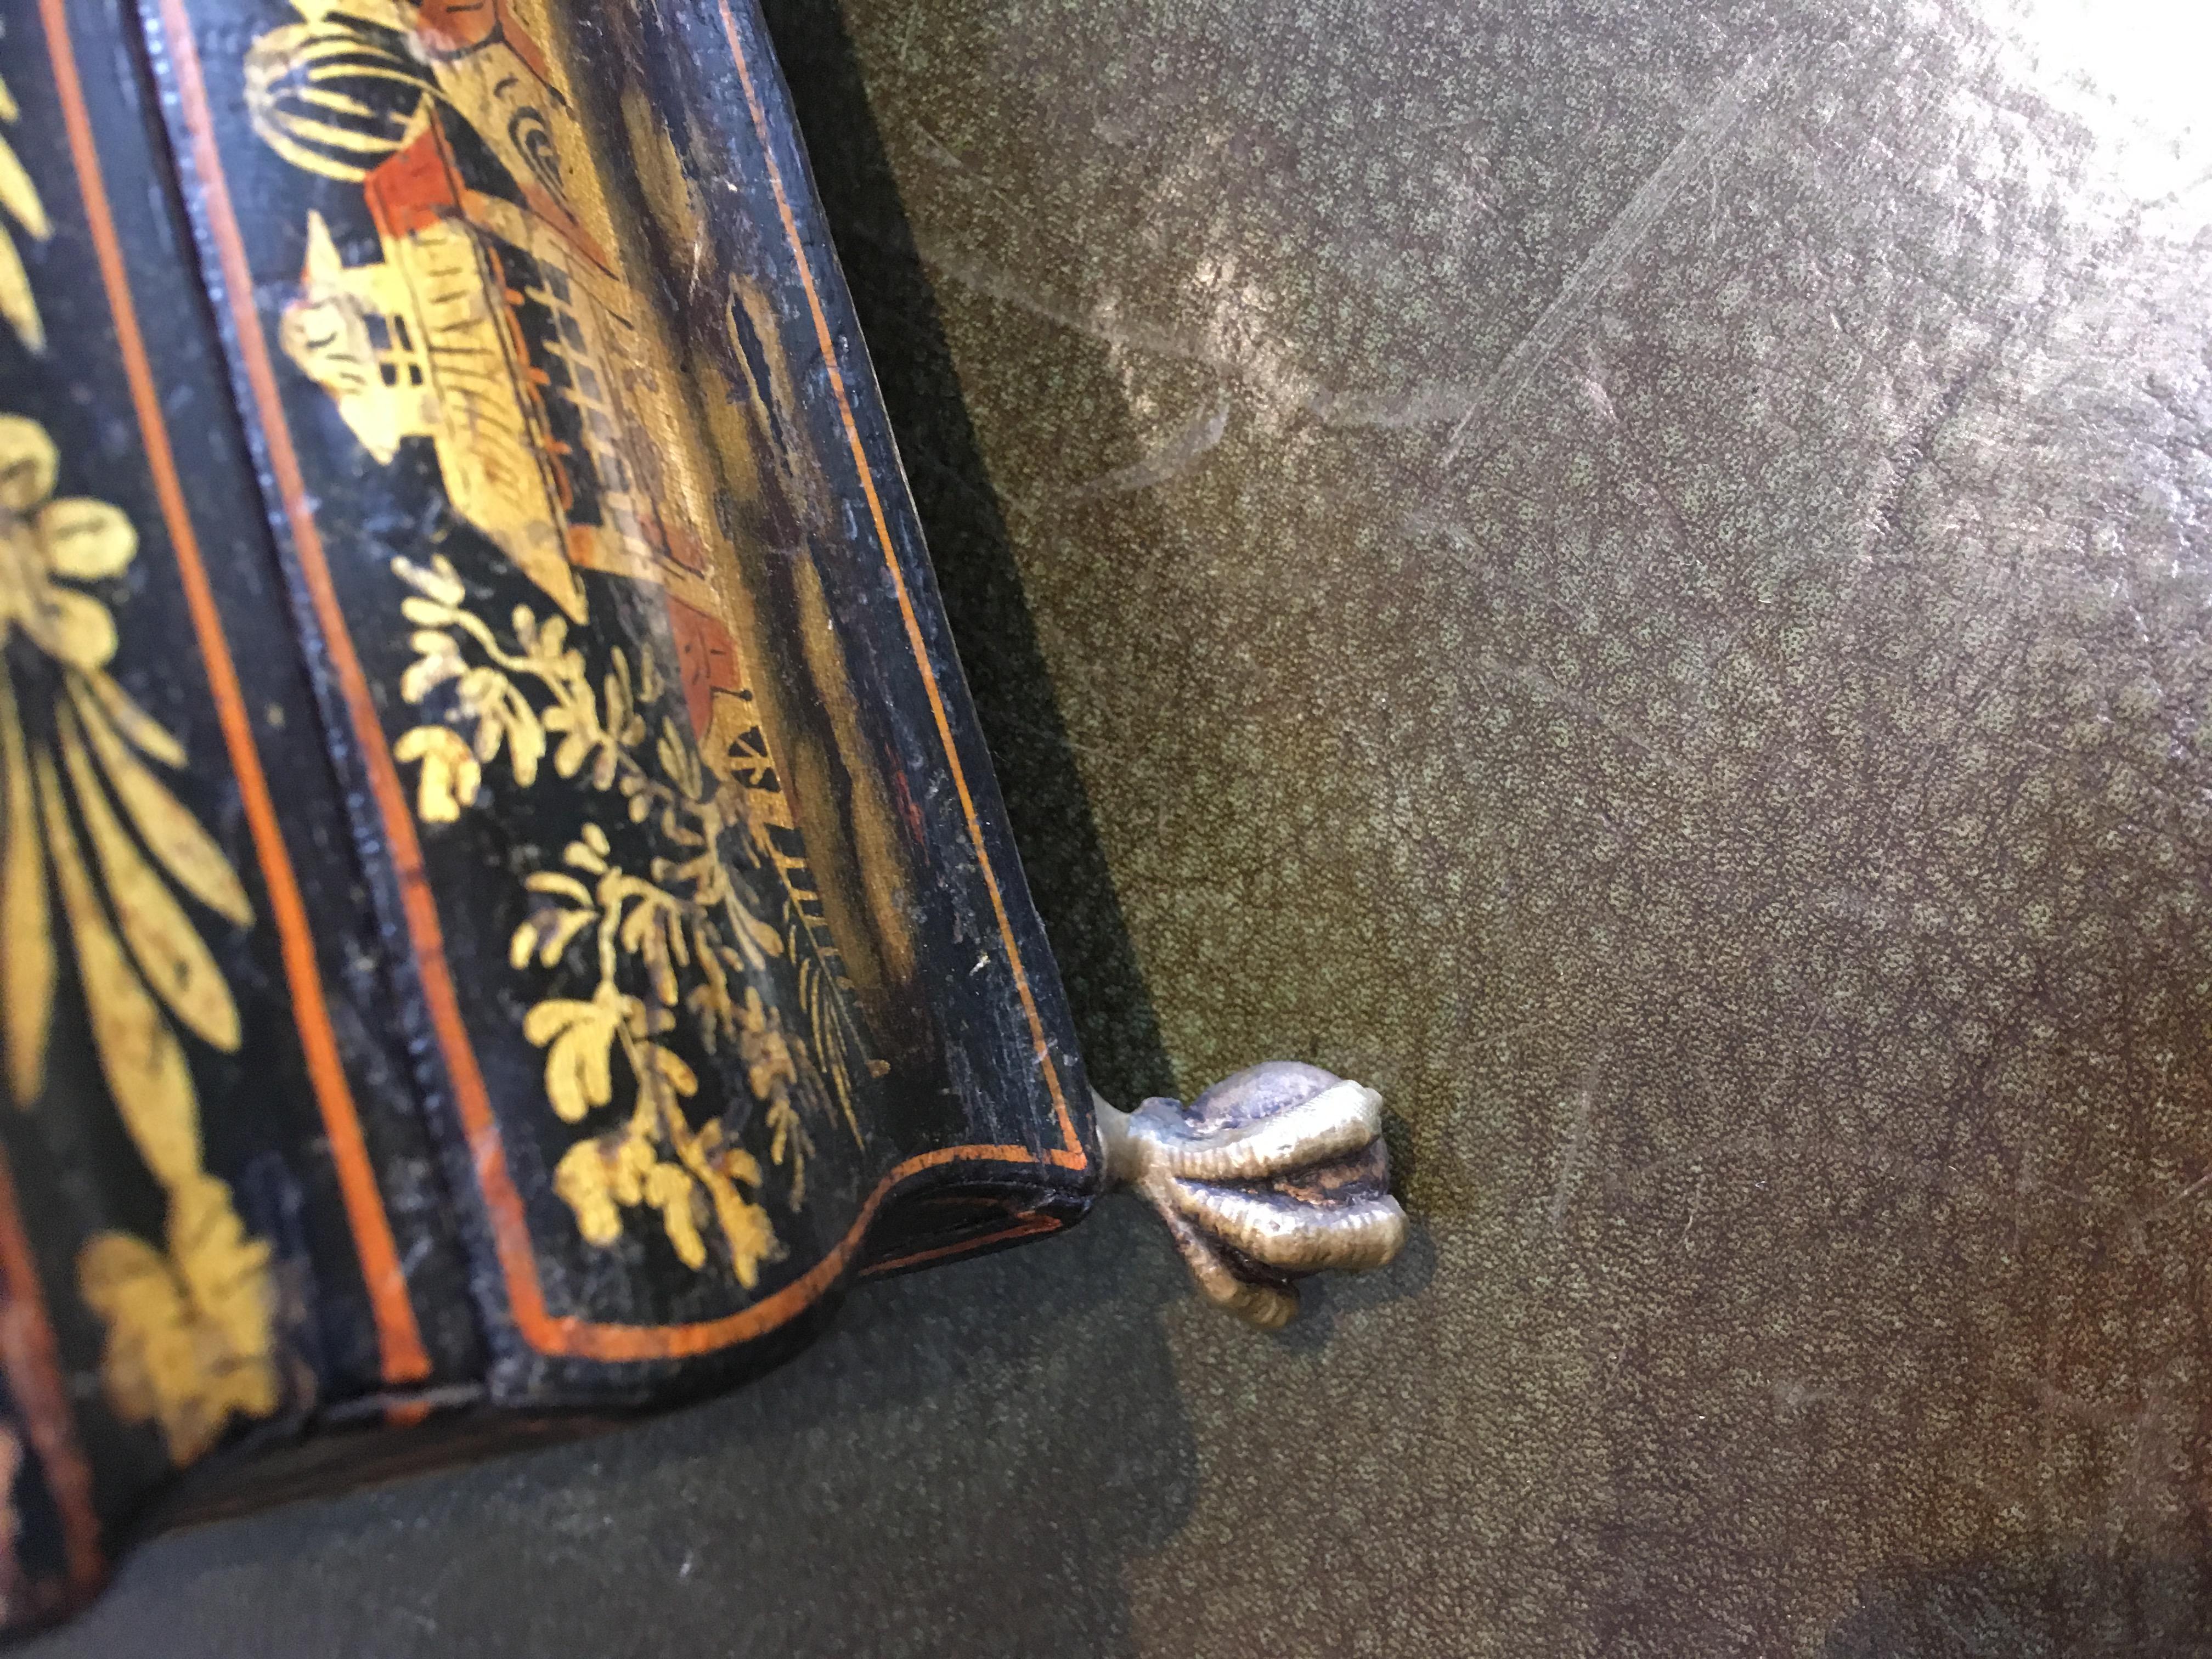 Early 19th Century Regency Period Japanned and Chinoiserie Lacquered Casket im Zustand „Gut“ im Angebot in Bradford on Avon, GB